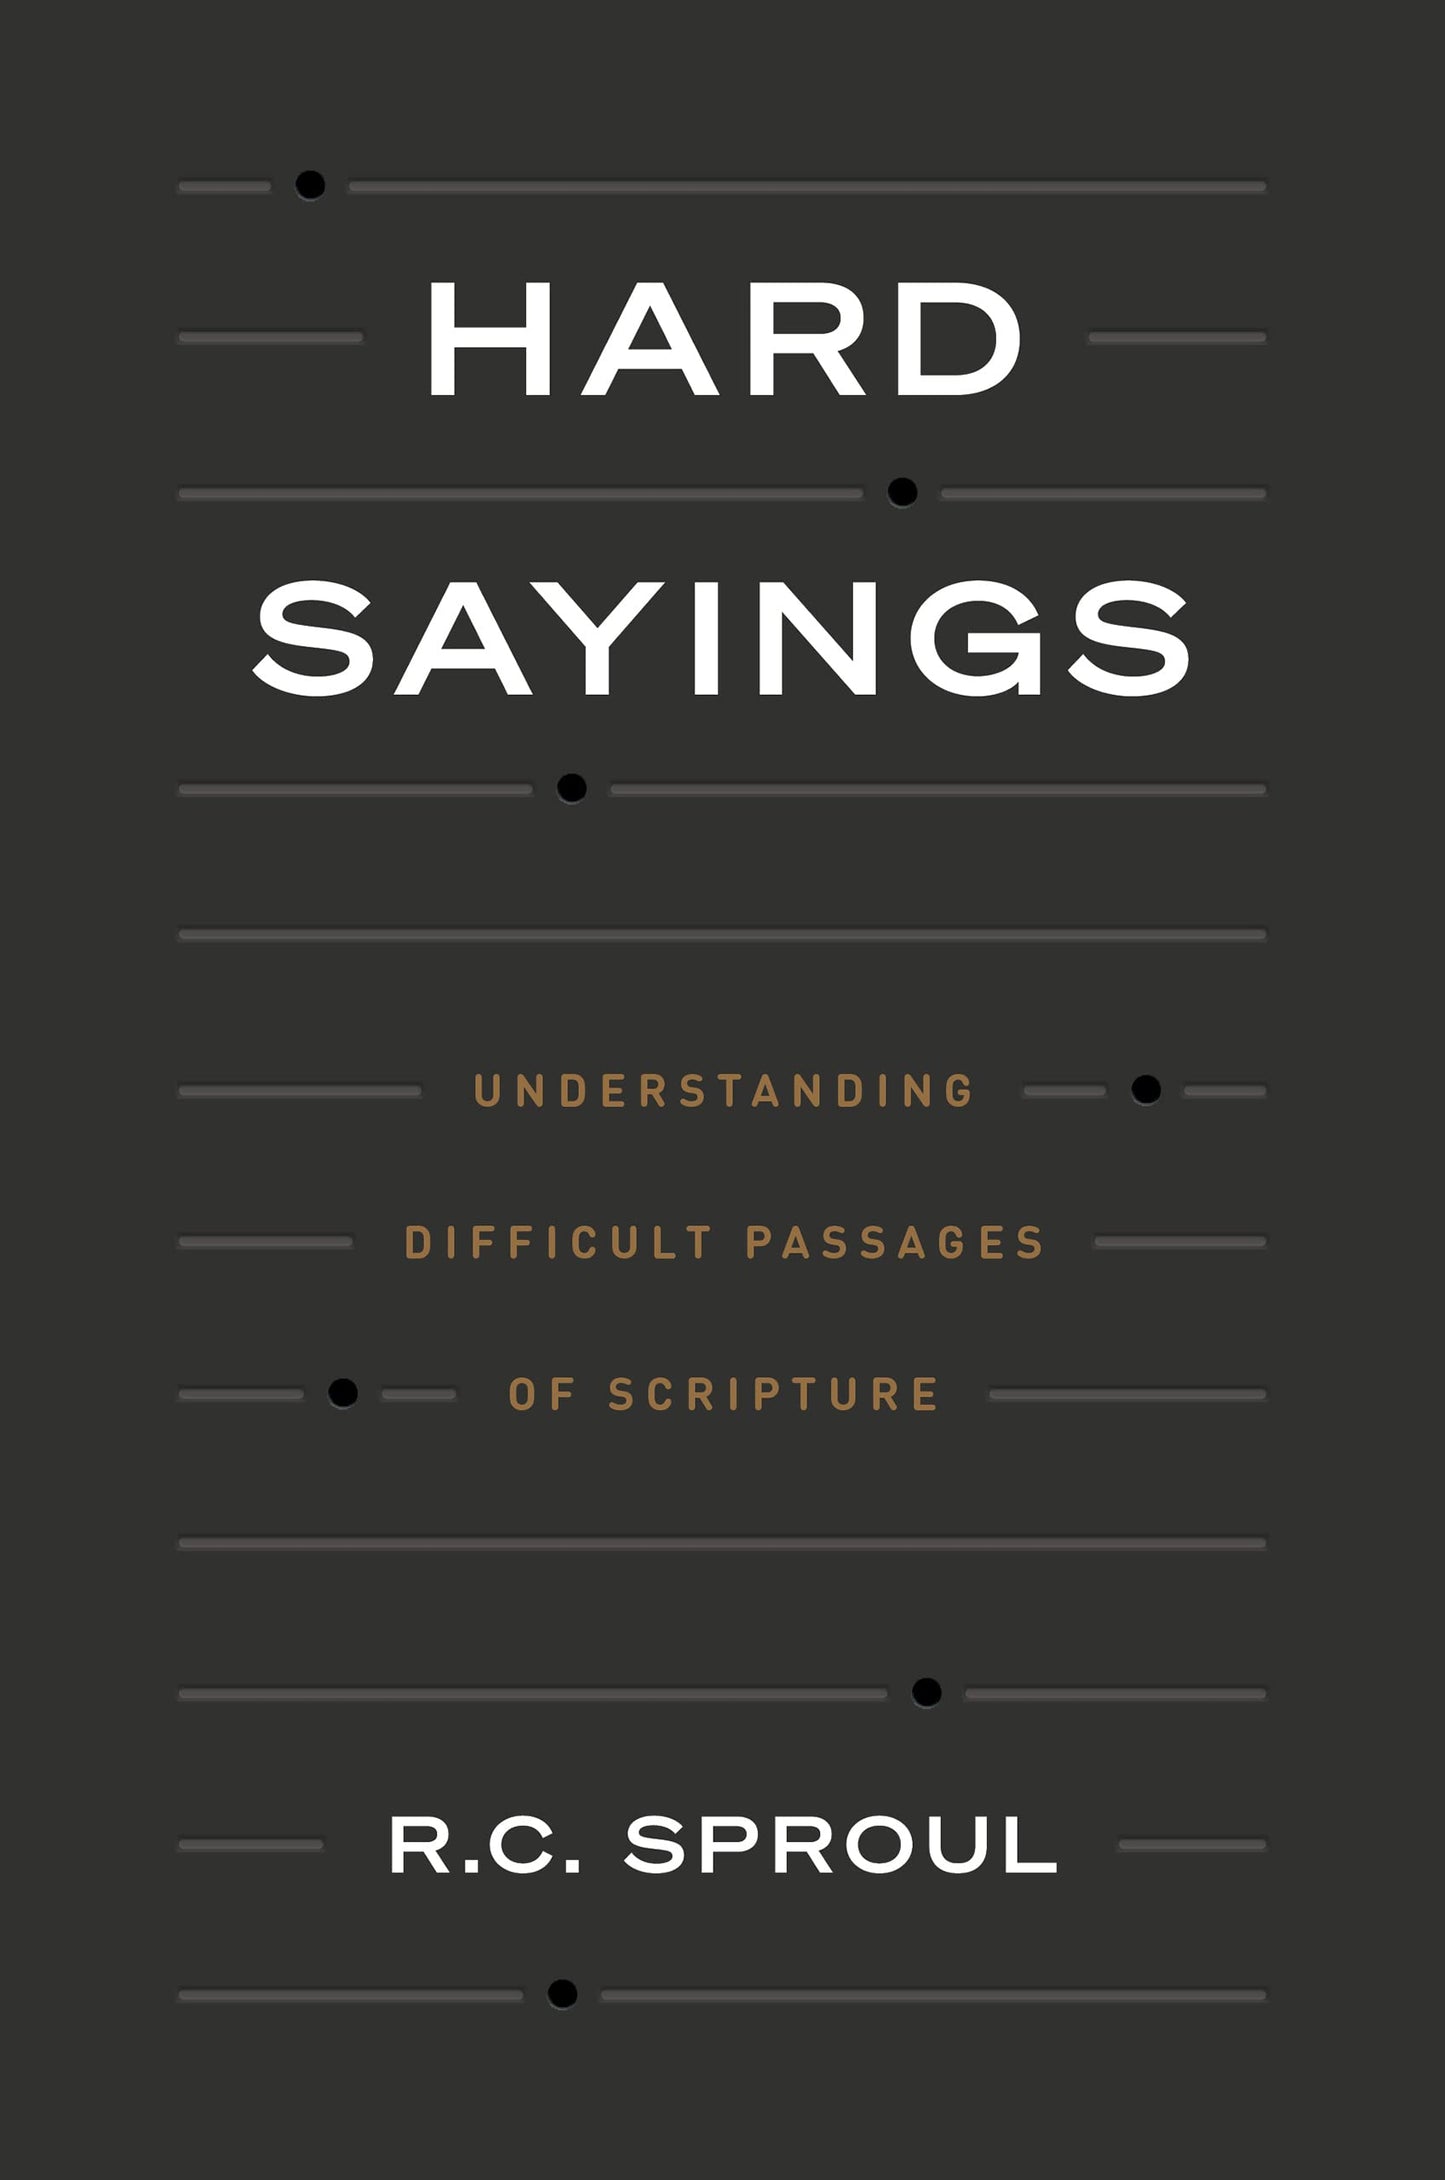 Hard Sayings (Sproul - hardcover)